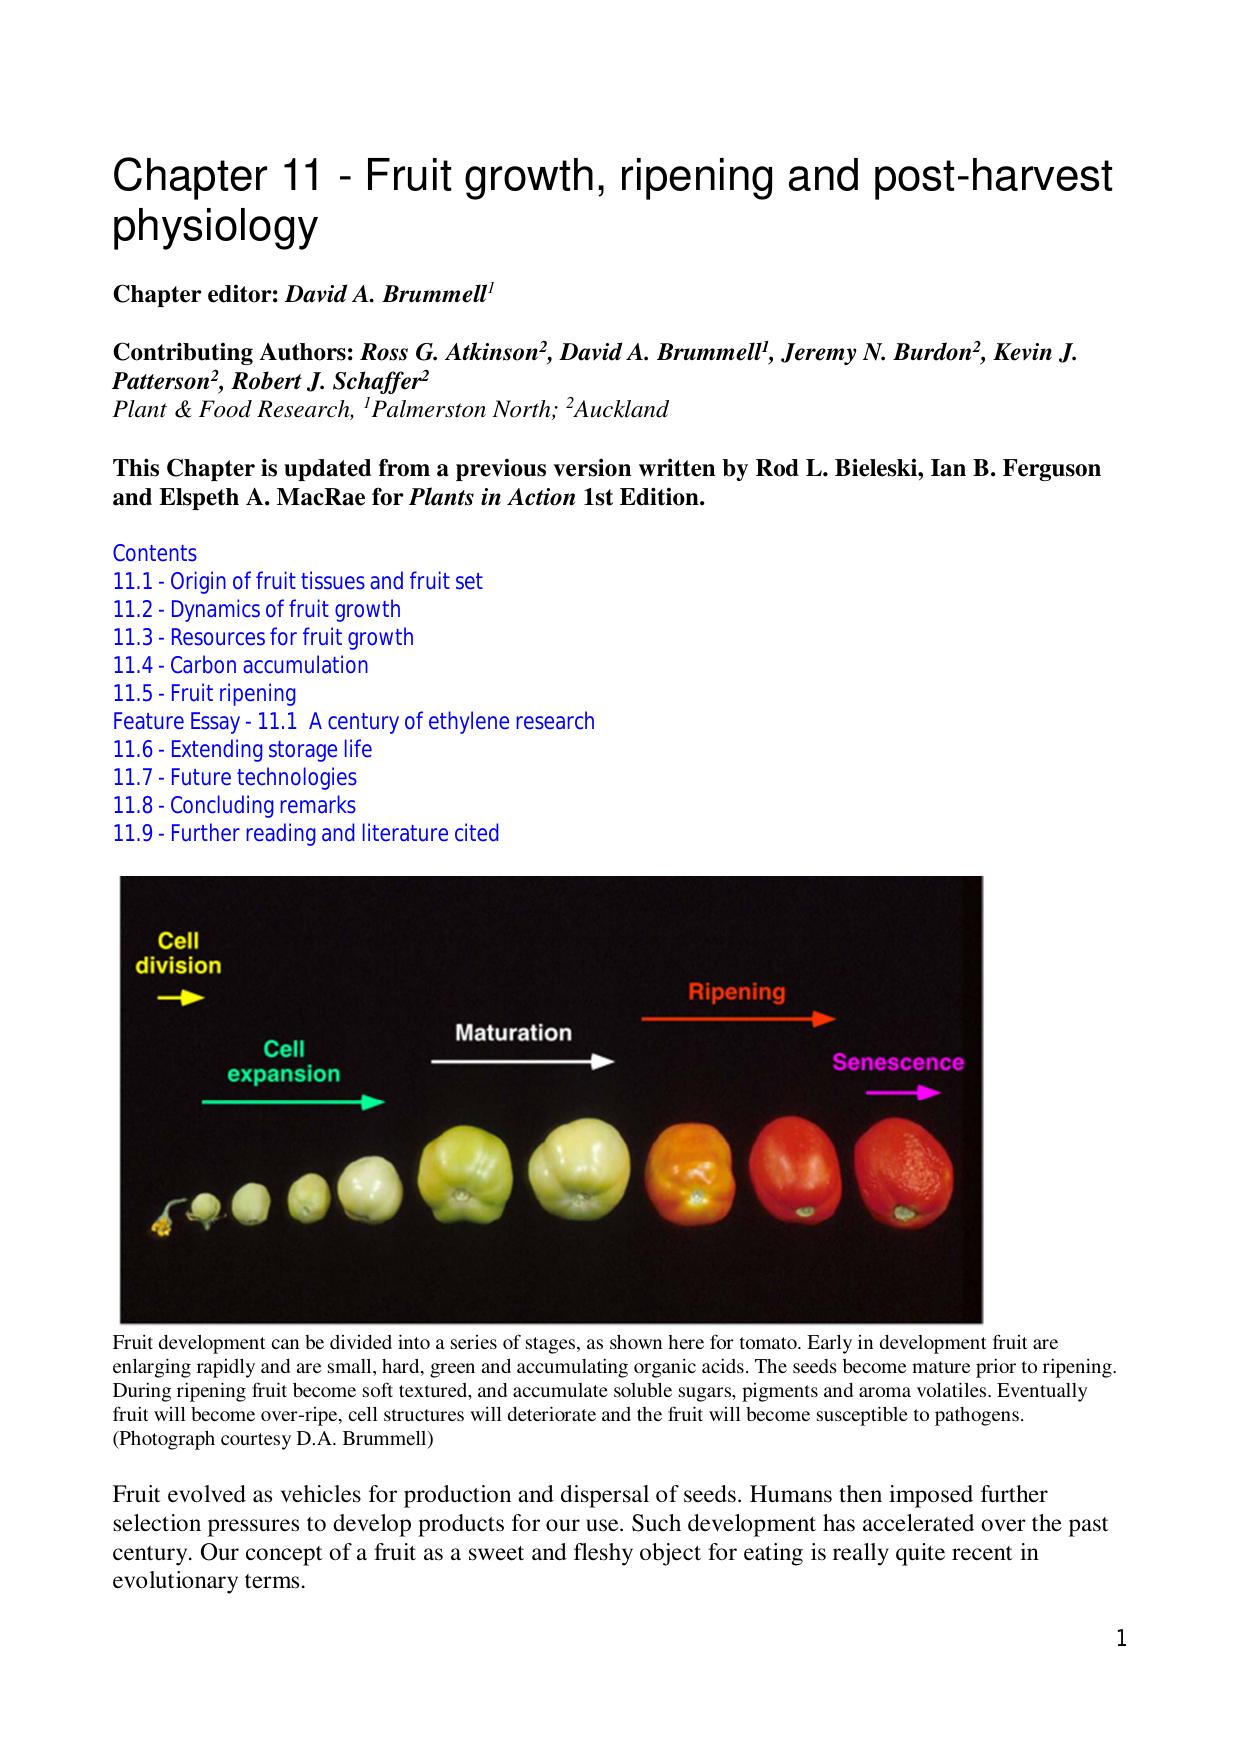 Fruit growth, ripening and post-harvest physiology 2016